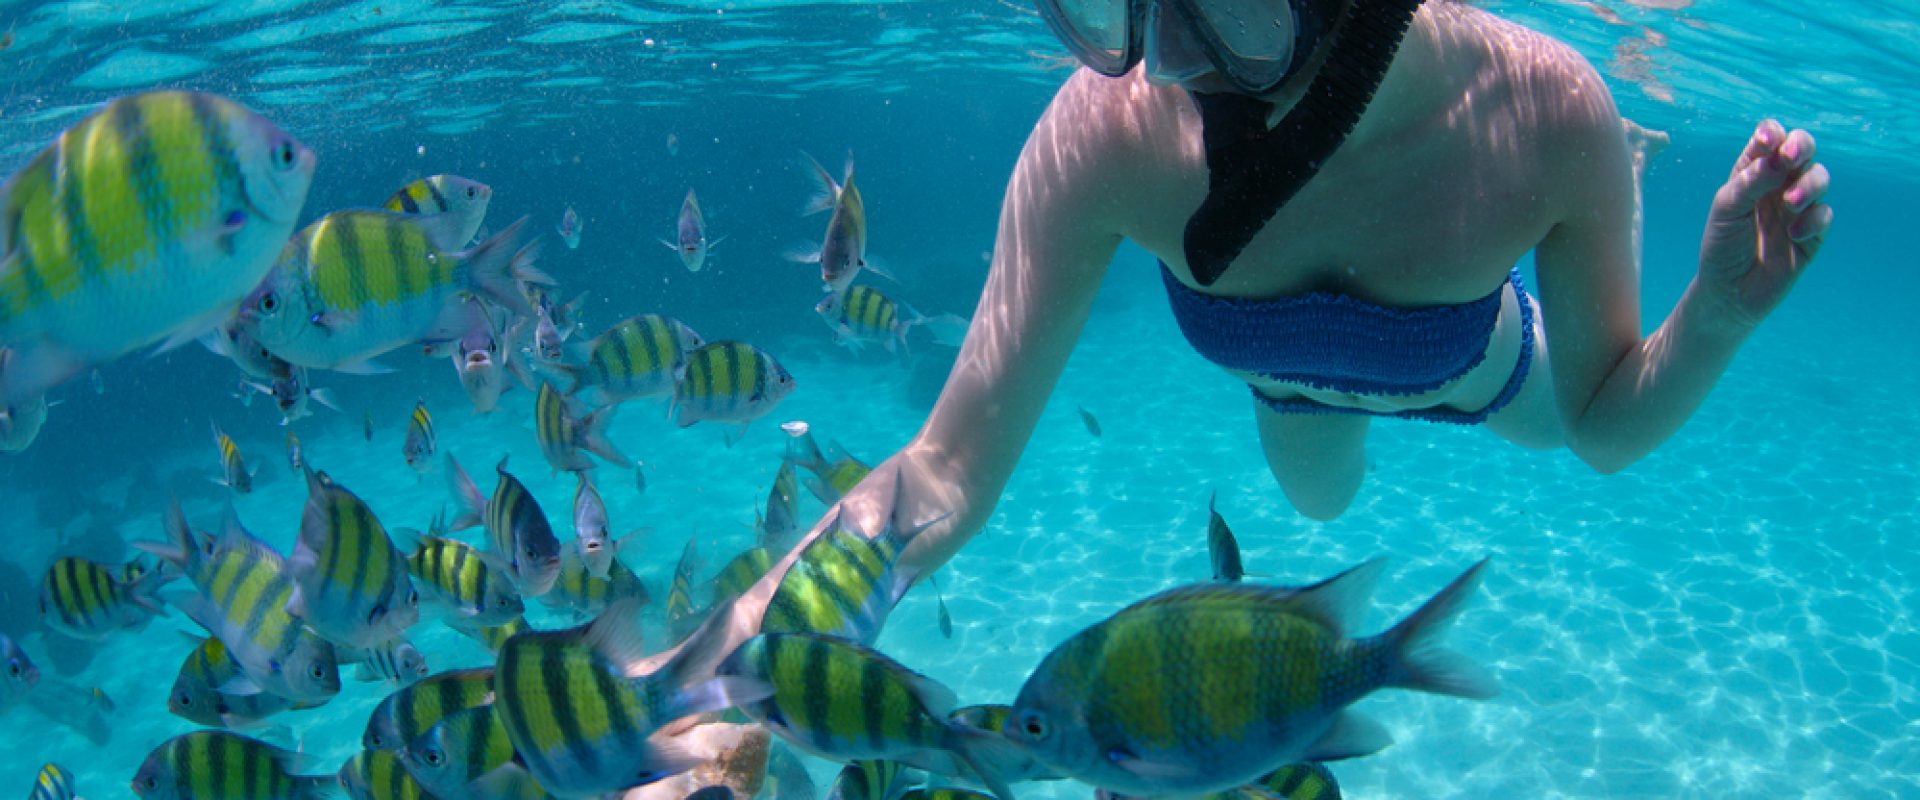 Young woman snorkeling in a tropical sea and feeding fish